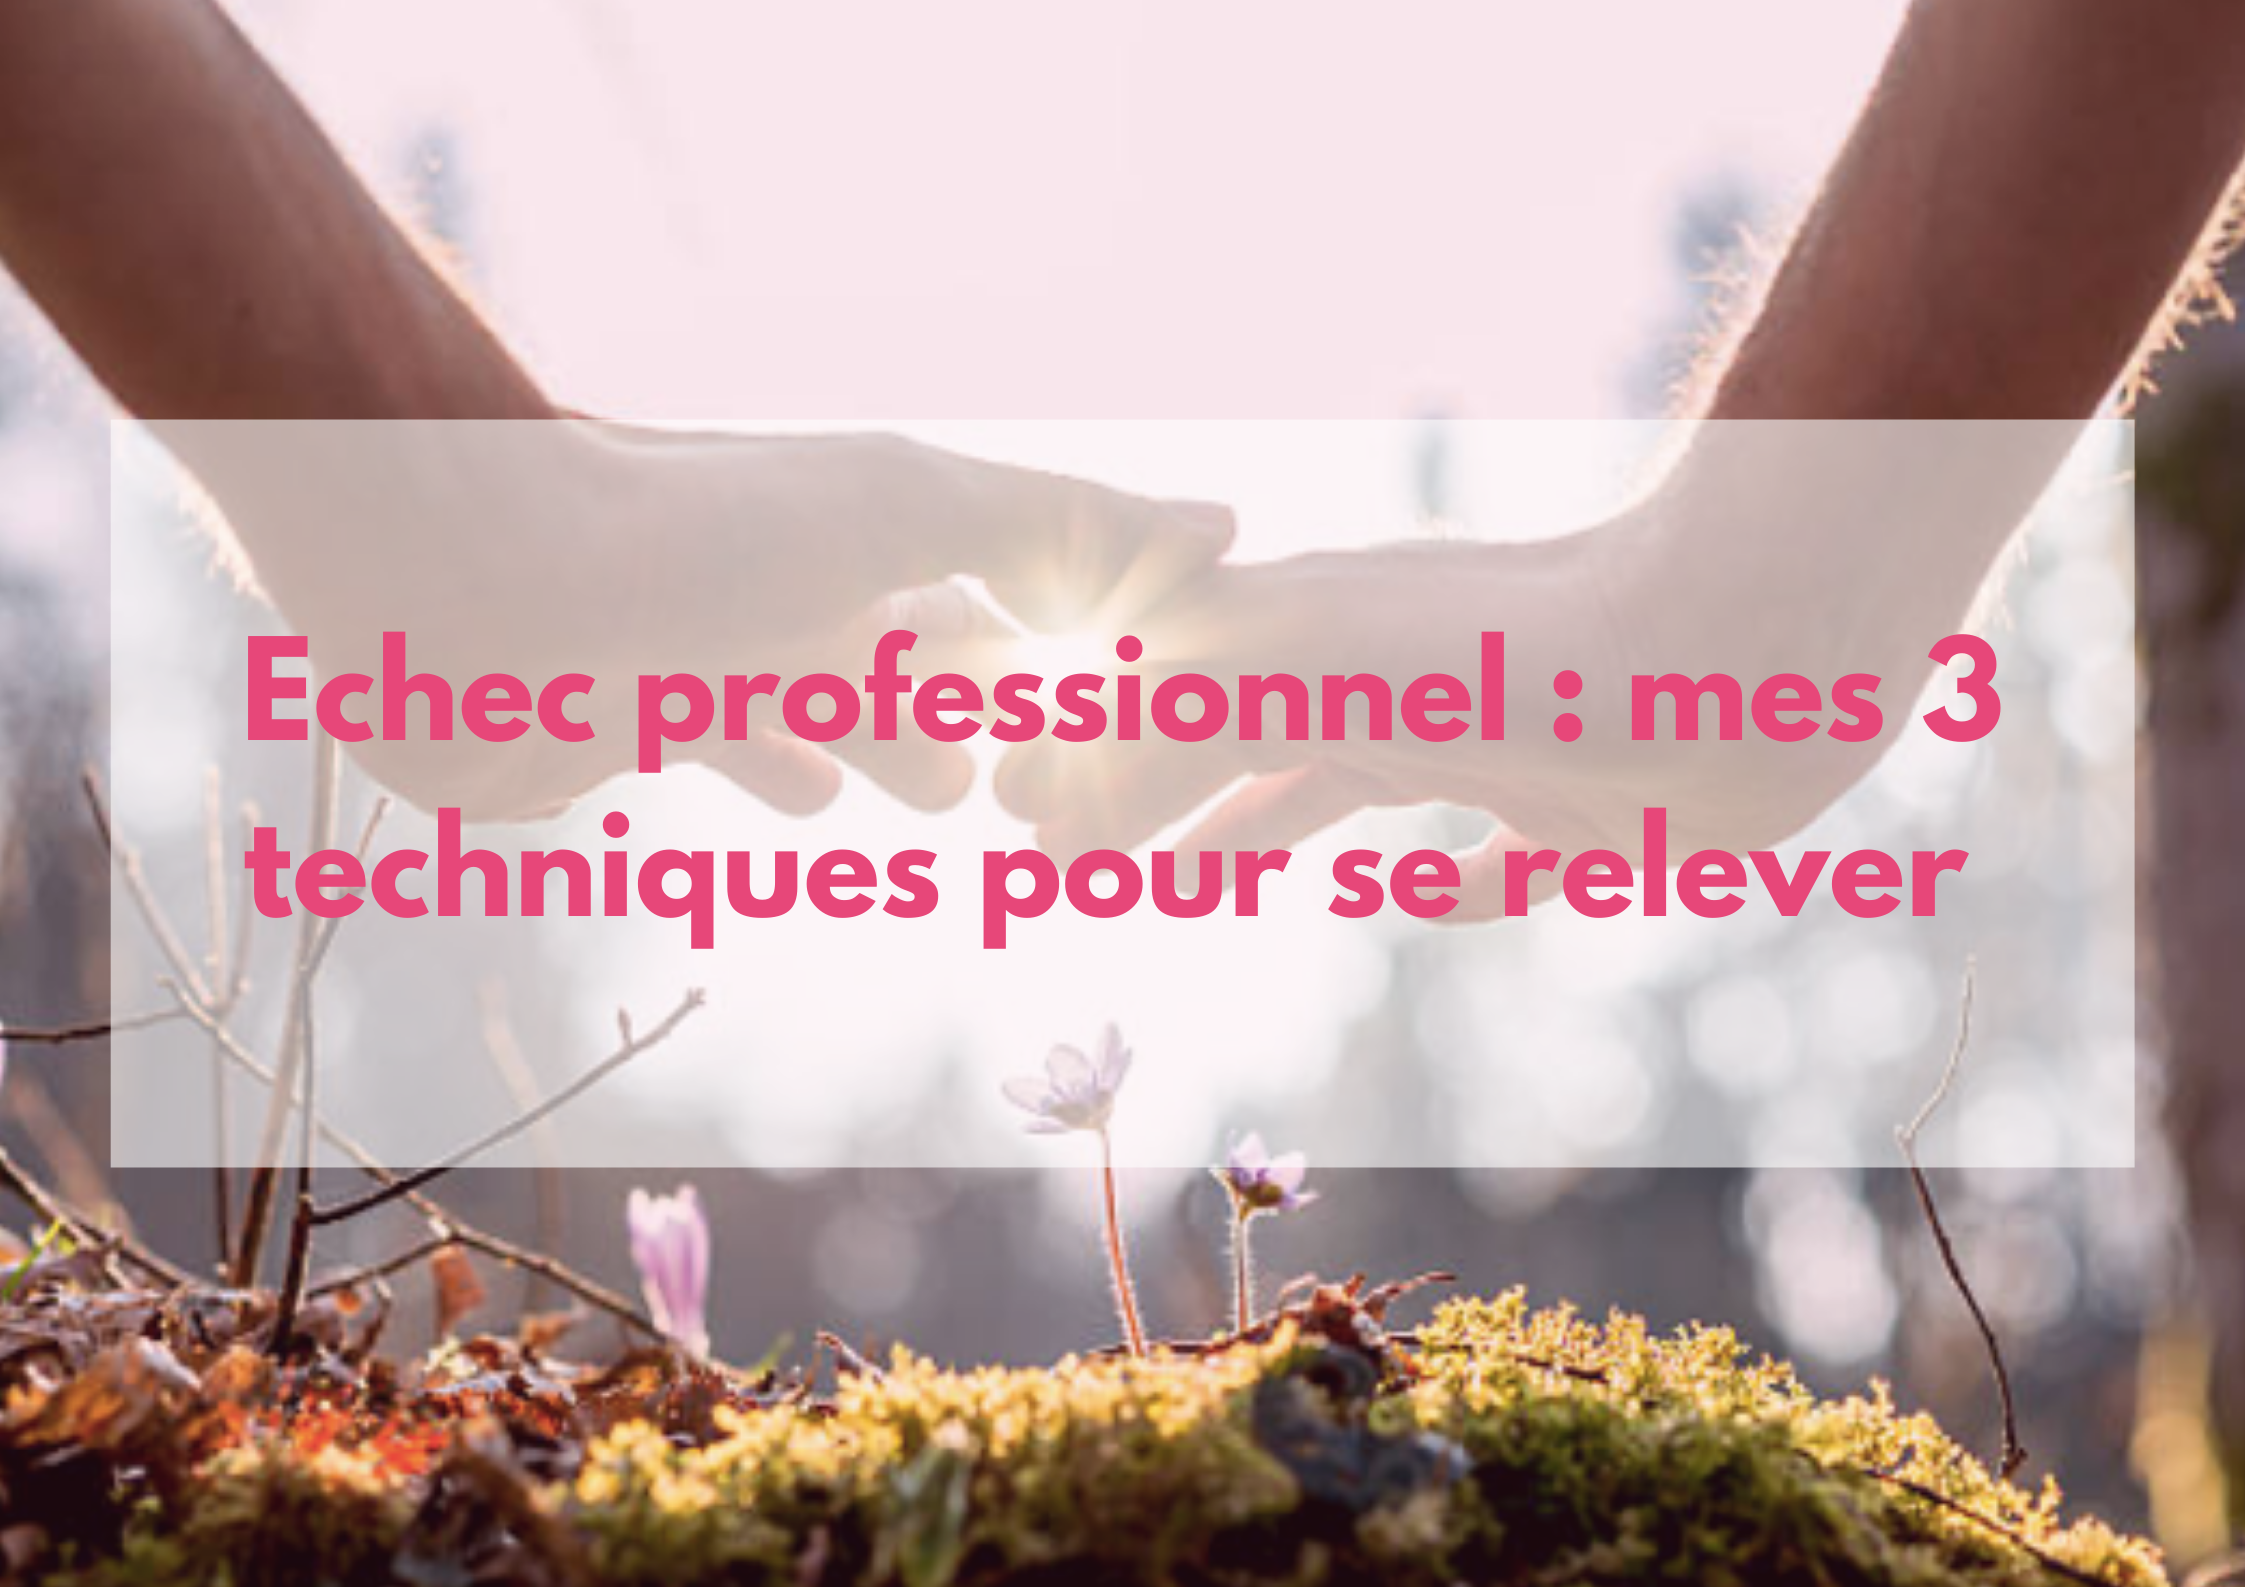 You are currently viewing Echec professionnel : mes 3 techniques favorites pour se relever